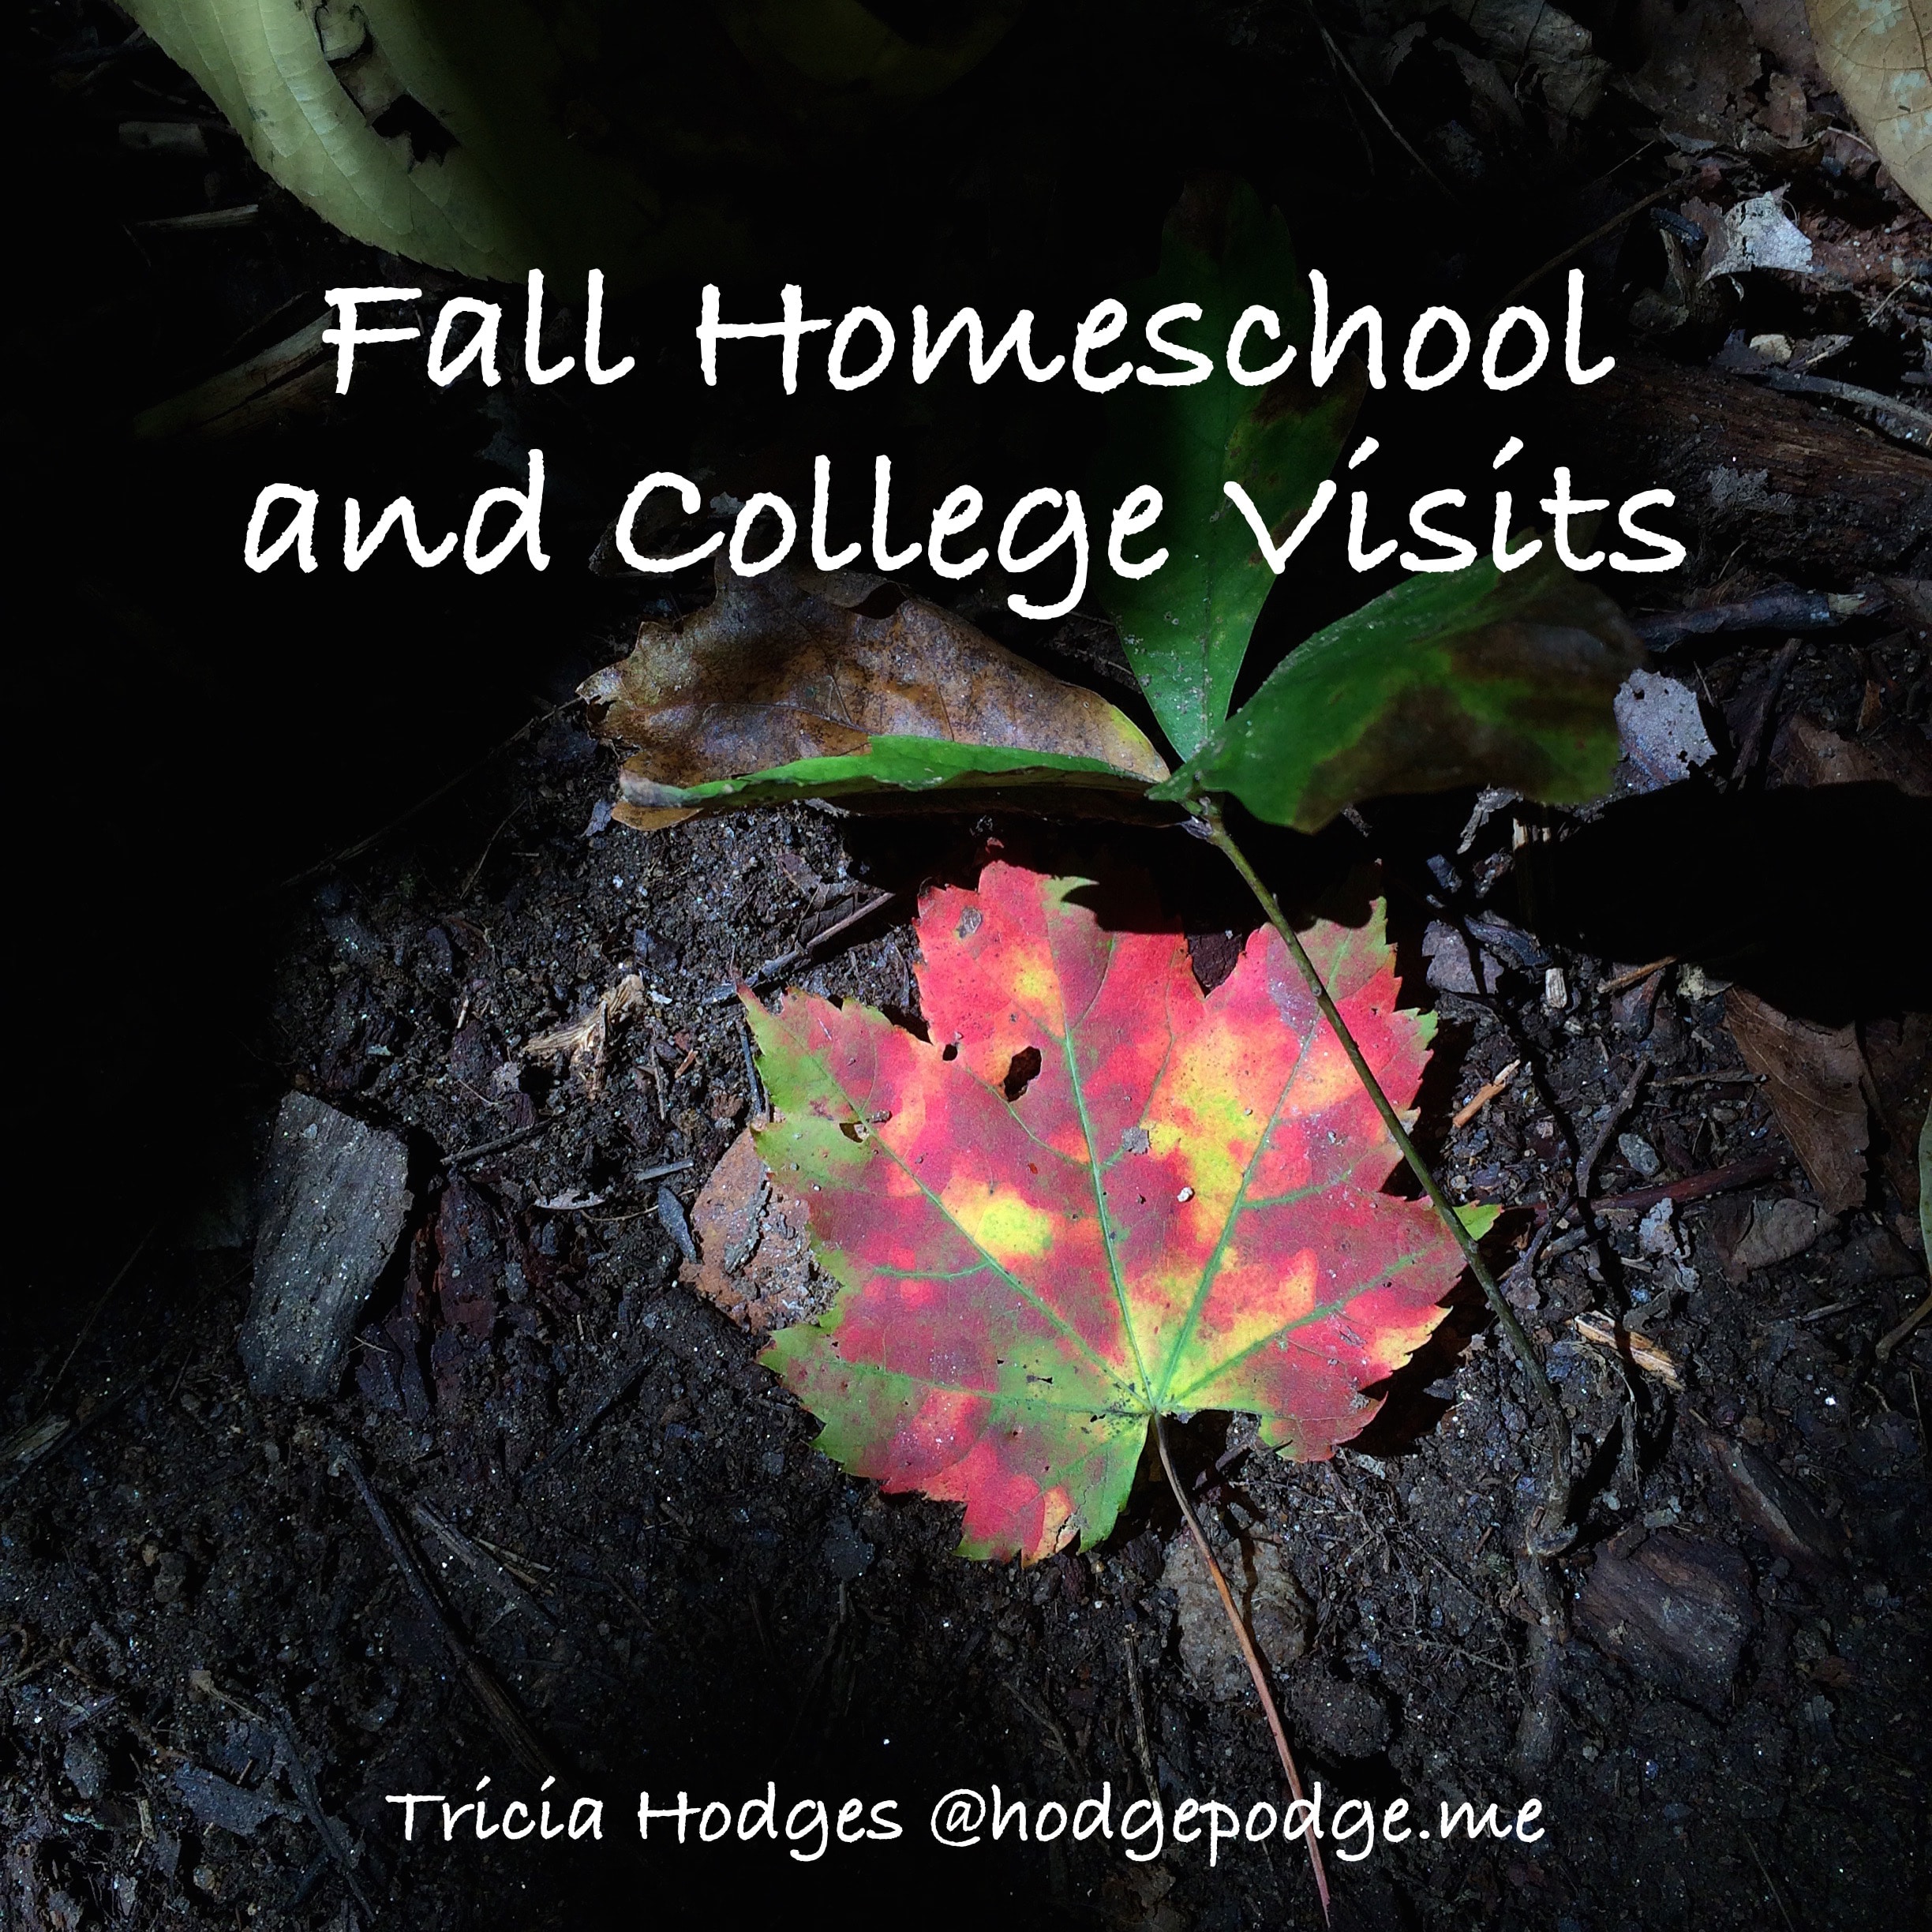 Fall Homeschool and College Visits